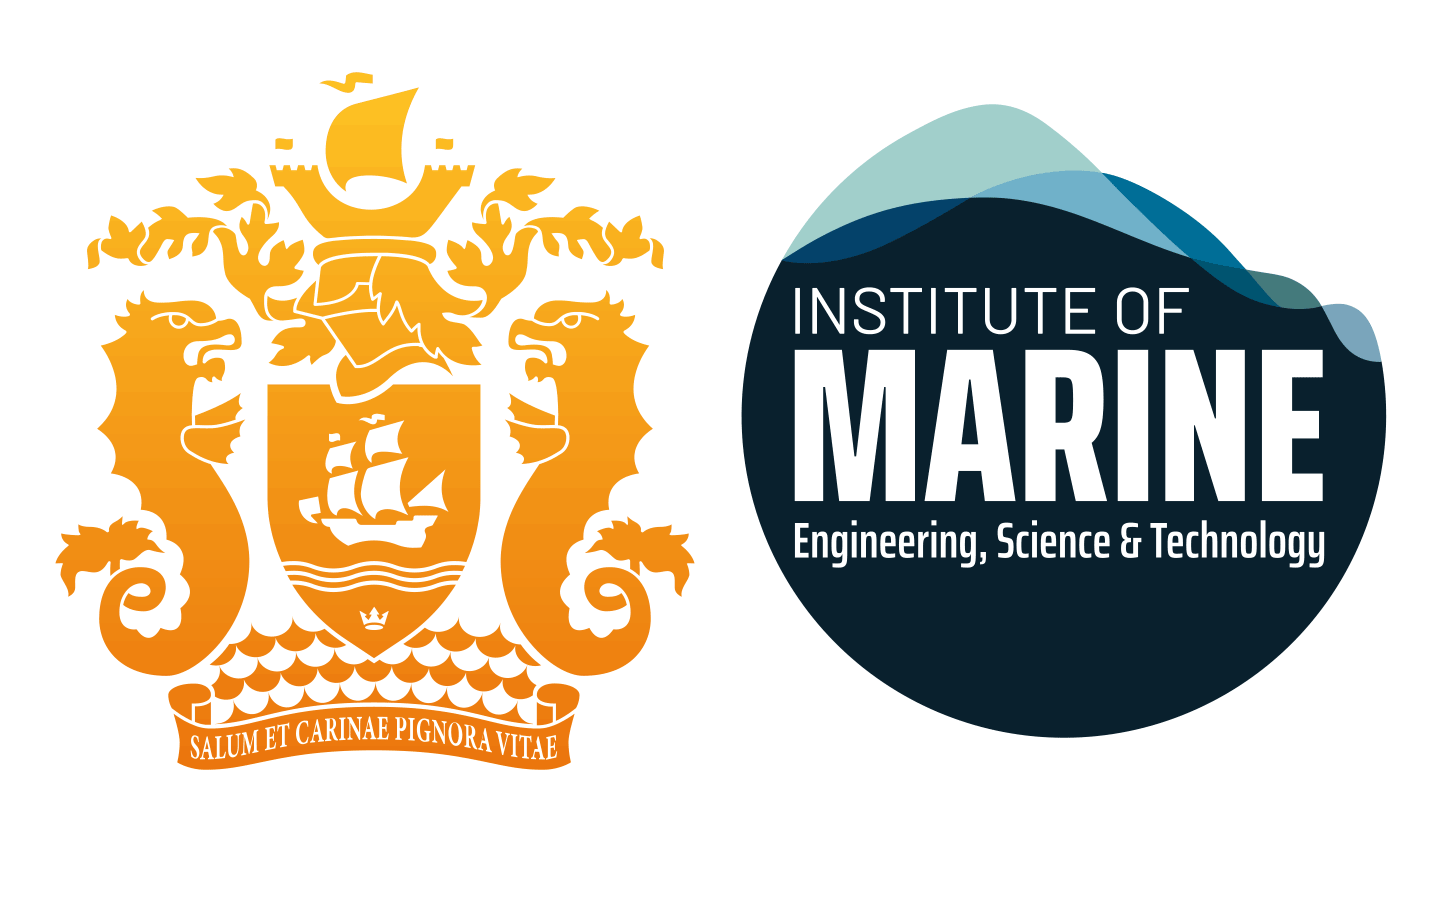 The Hong Kong Joint Branch of the Royal Institution of Naval Architects and the Institute of Marine Engineering, Science and Technology (HKJB of RINA & IMarEST)